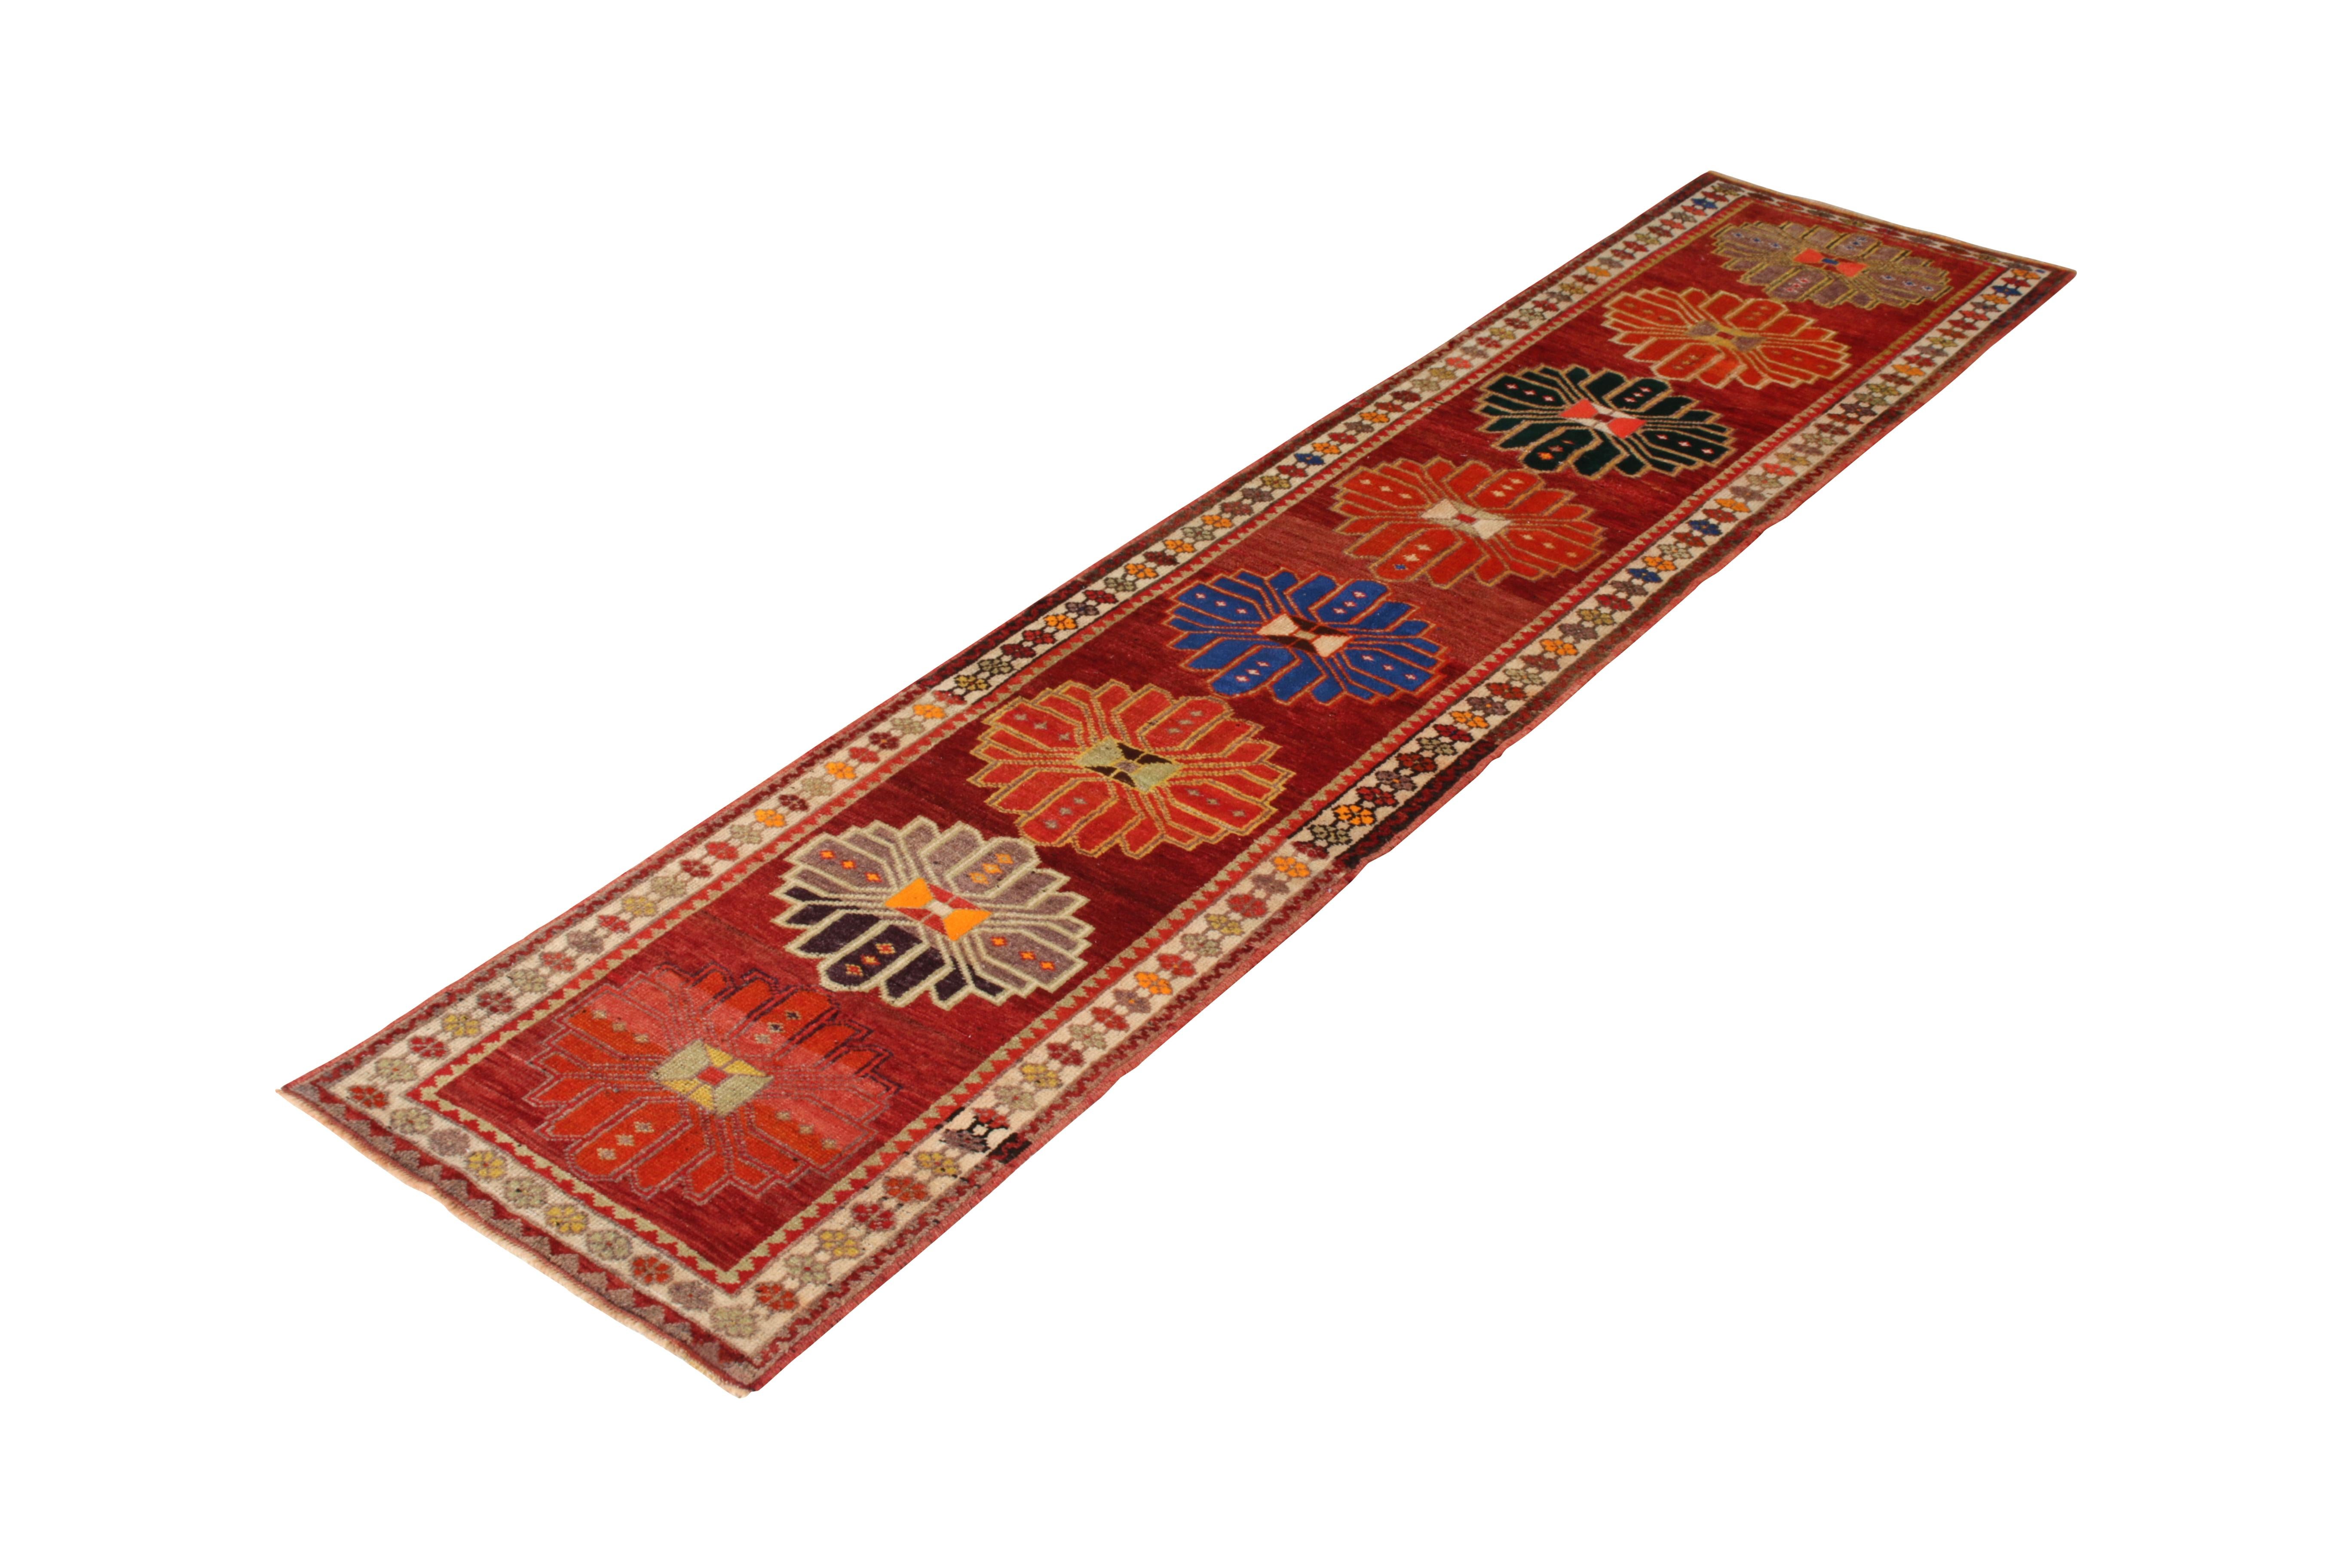 Hand knotted in wool originating from Turkey, circa 1950-1960, this vintage runner enjoys a distinctively rich, tastefully abrashed burgundy background, complemented by a series of arresting medallion patterns in the field. The variations of